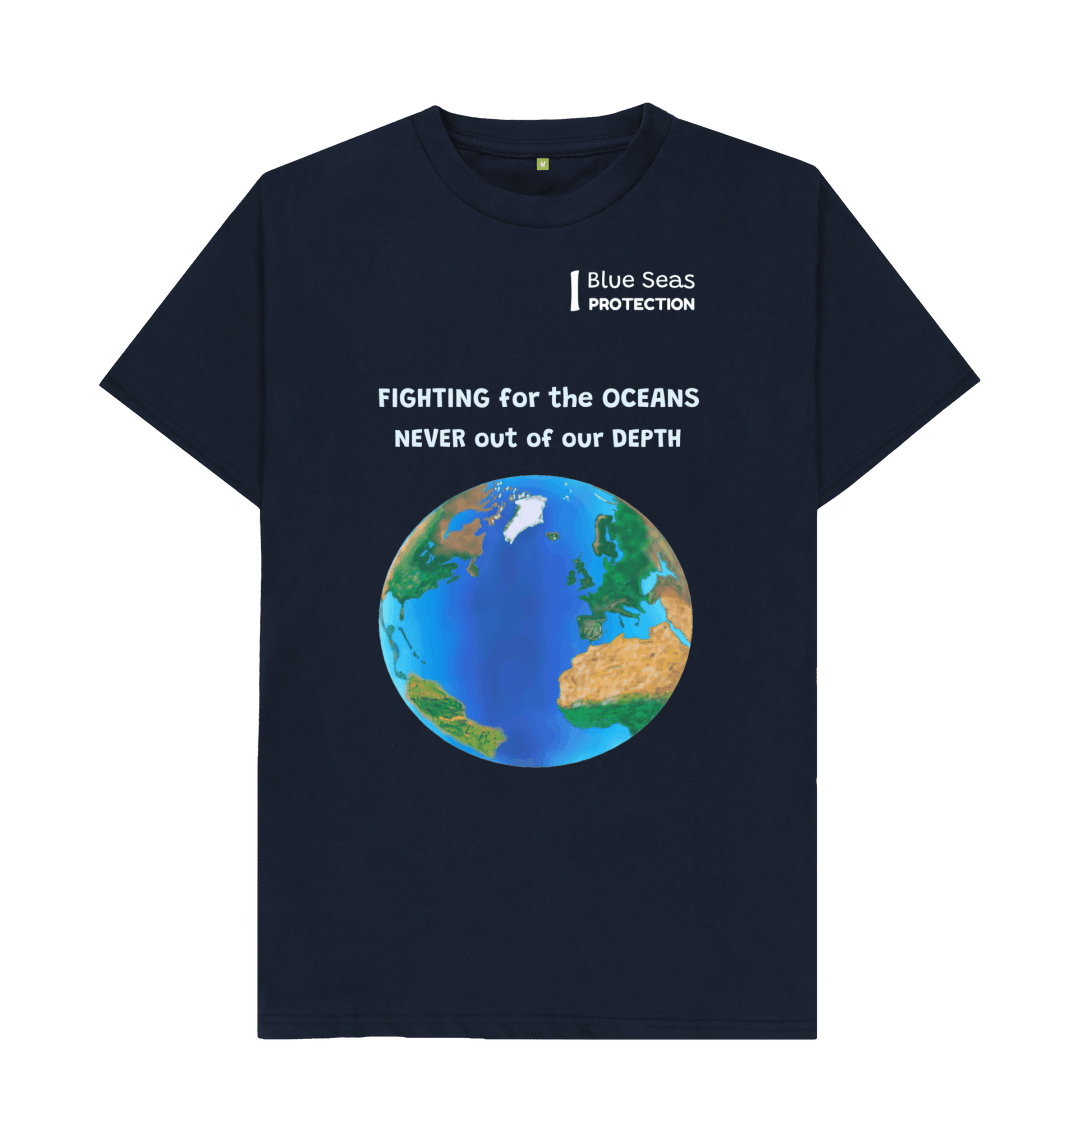 black t-shirt with image of planet earth and wording 'Blue Seas Protection - fighting for the oceans, never out of our depth'.